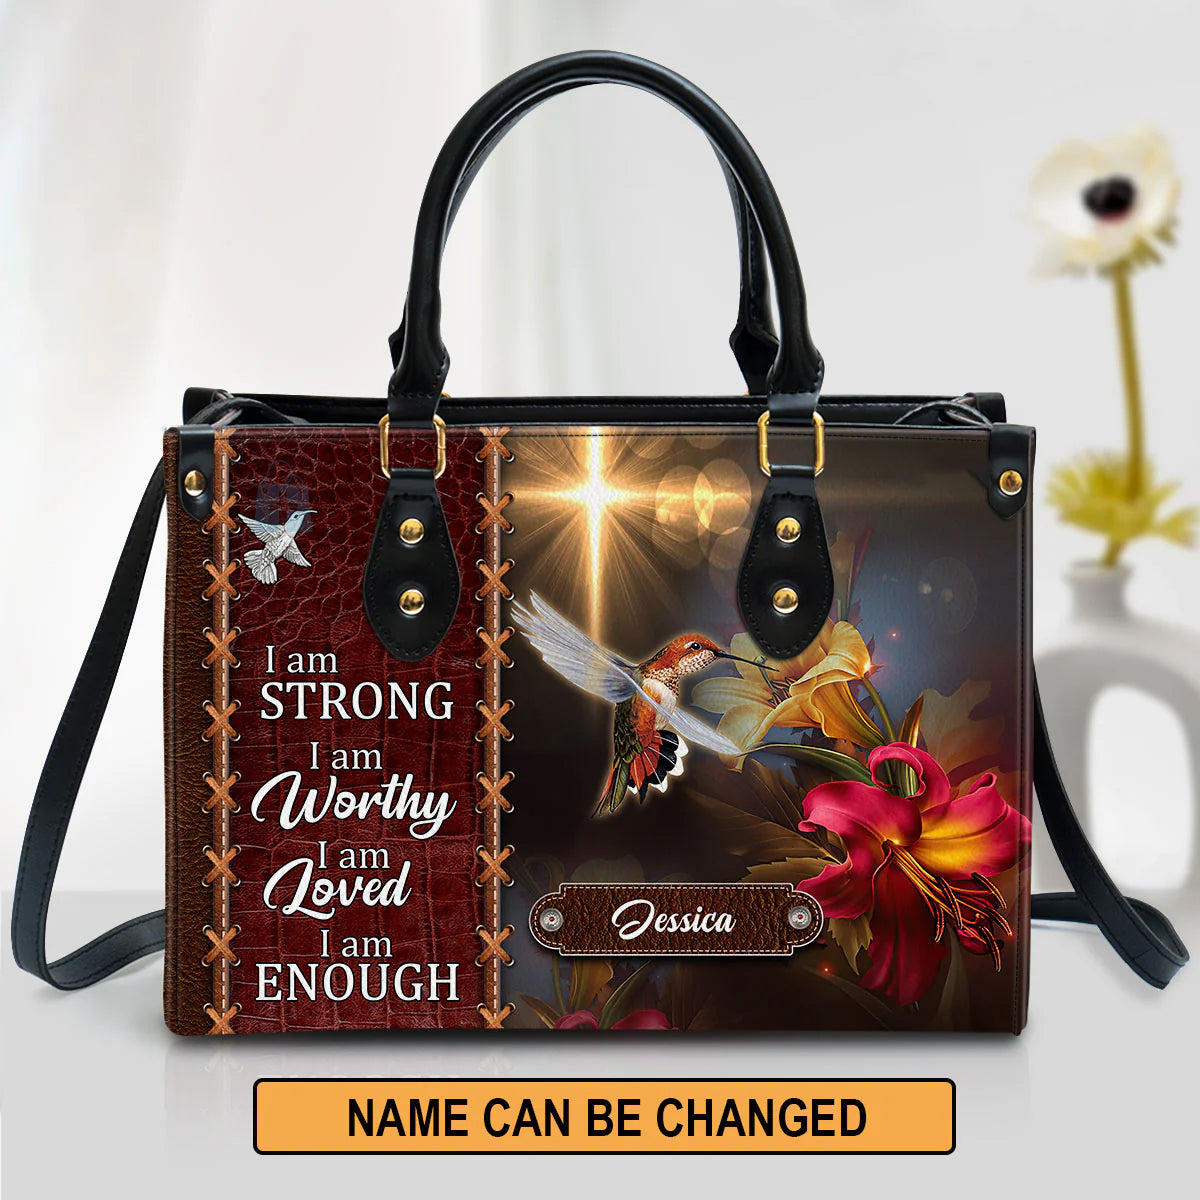 Christianart Handbag, Personalized Bags, I Am Enough, Personalized Gifts, Gifts for Women, Holiday Gift. - Christian Art Bag